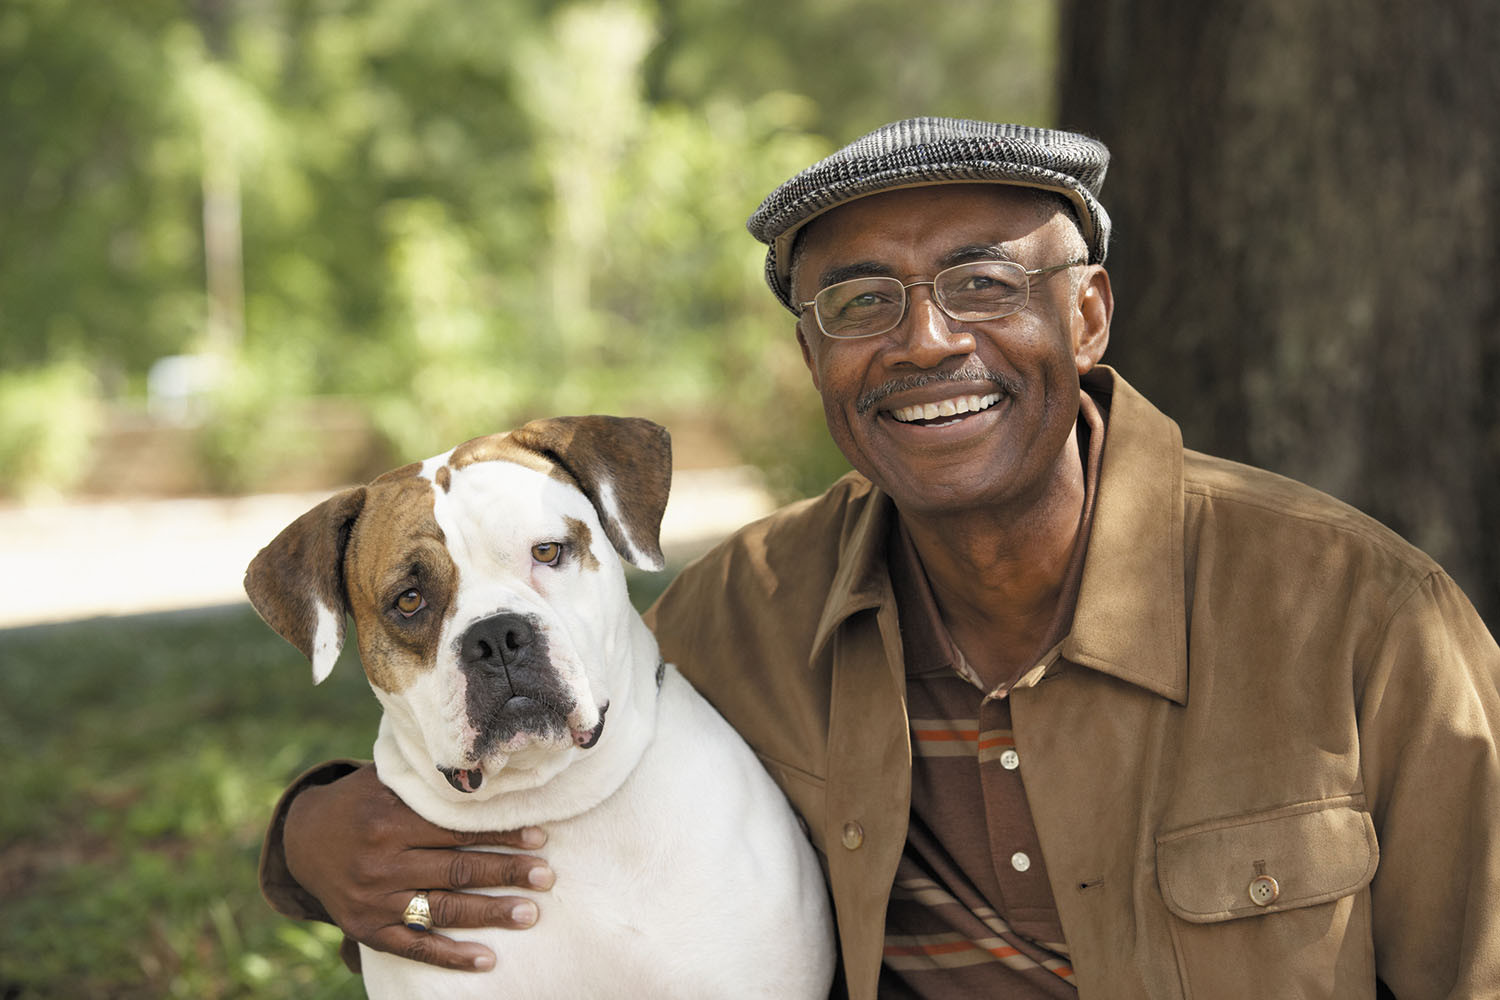 photo of a smiling man posing with his dog outdoors in front of a tree